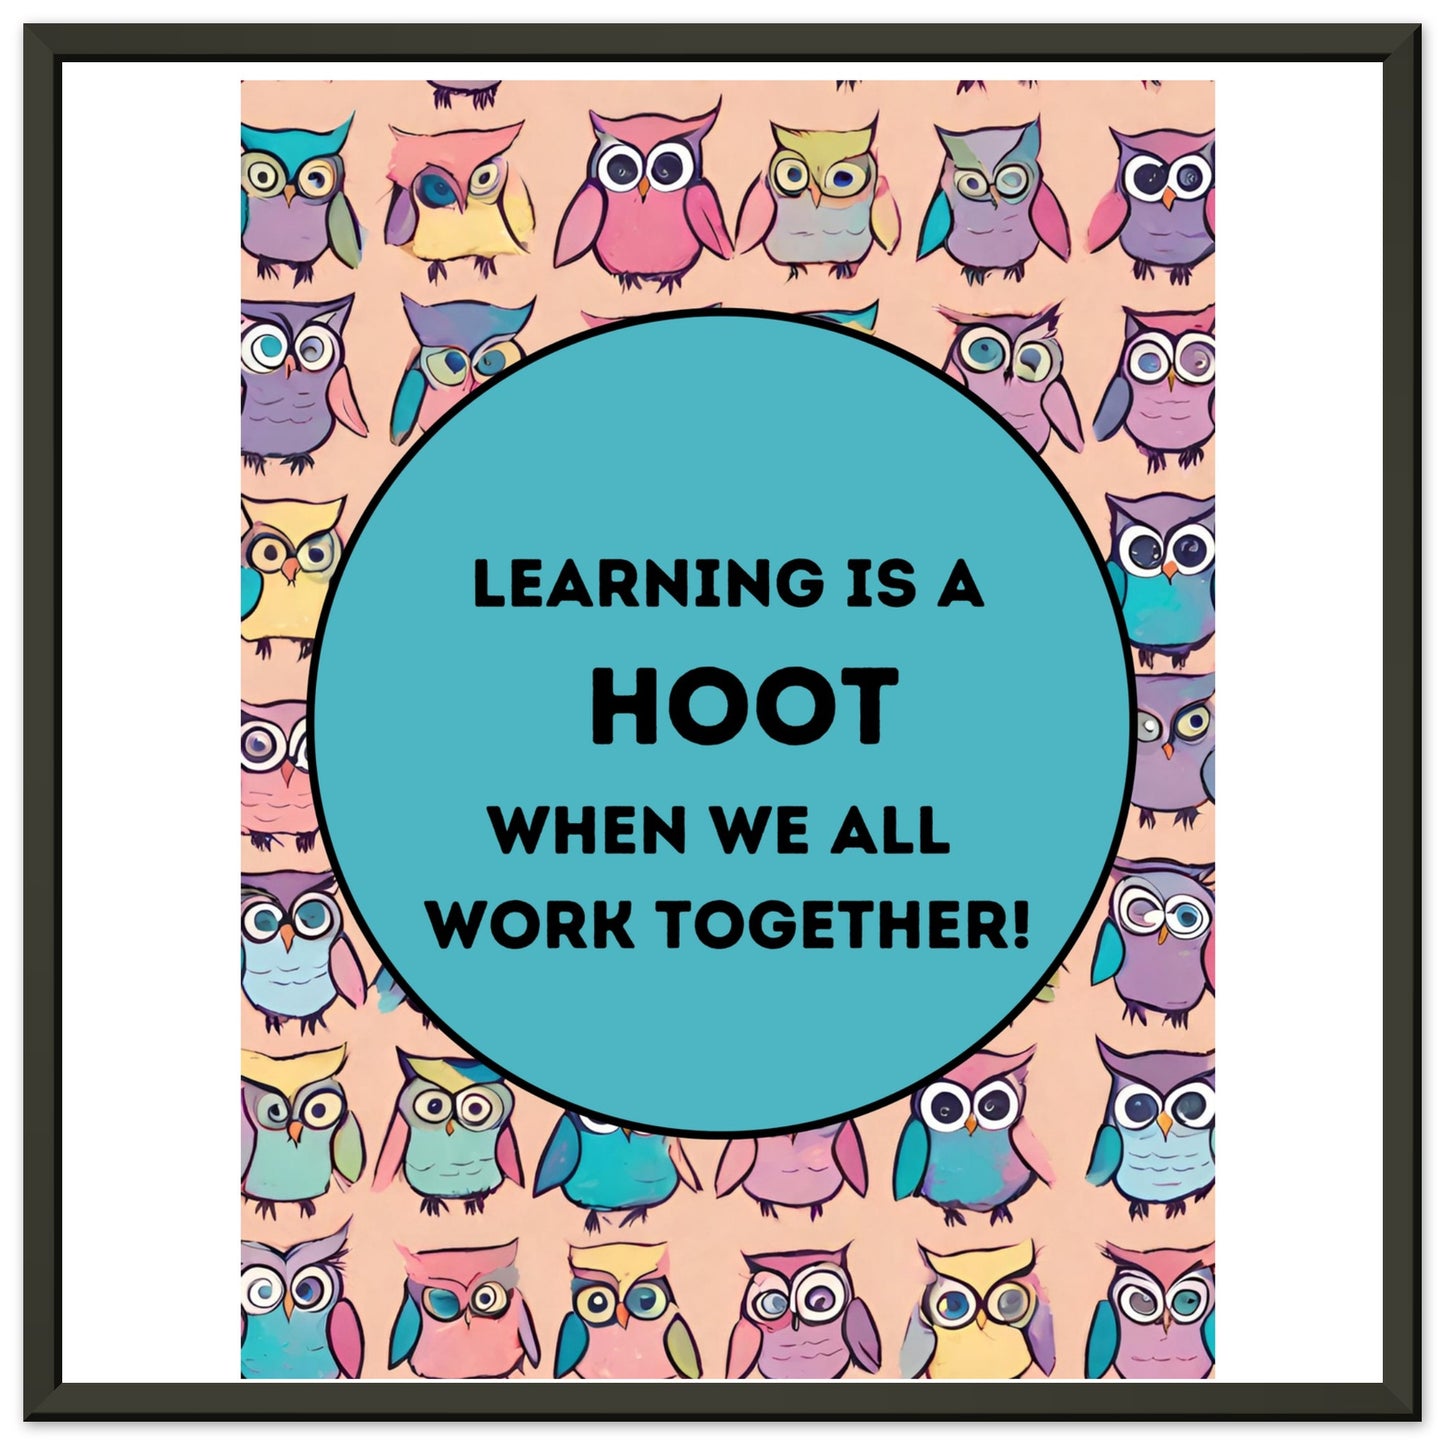 Learning is a HOOT Premium Matte Paper Metal Framed Poster